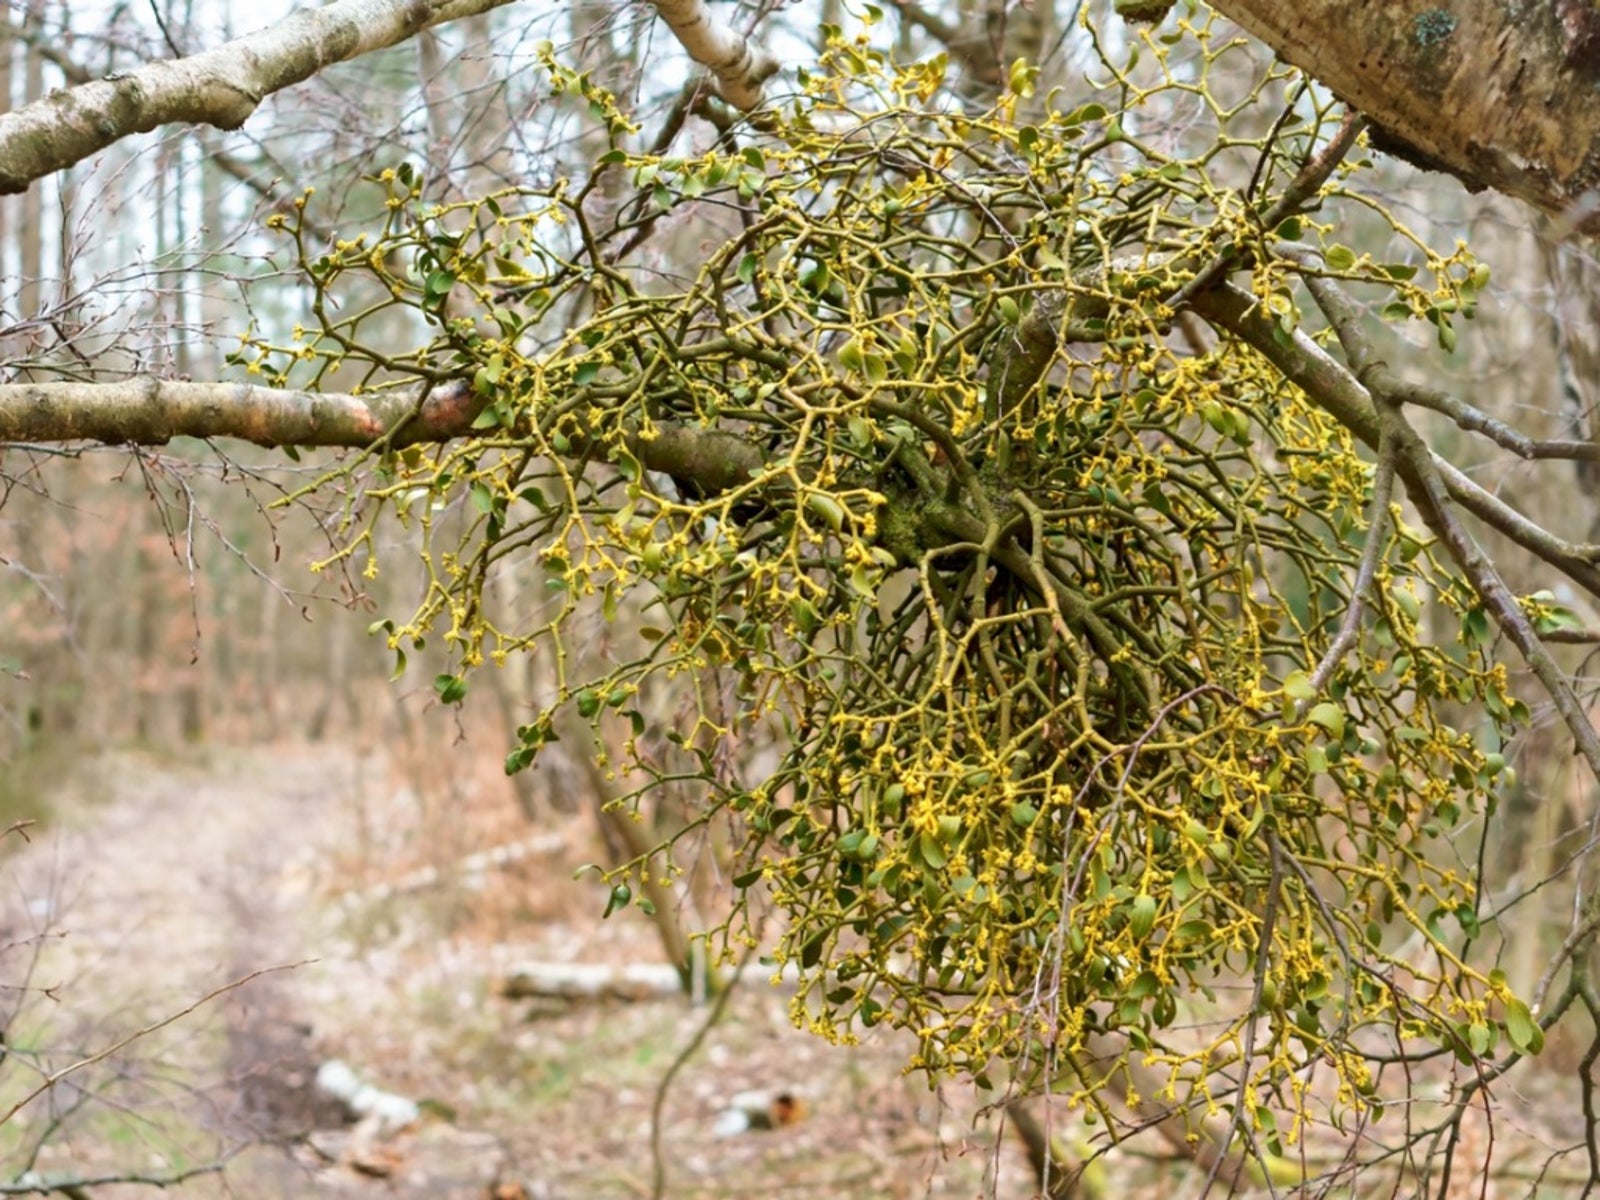 Parasitic Plant Info - Learn About Different Types Of Parasitic Plants